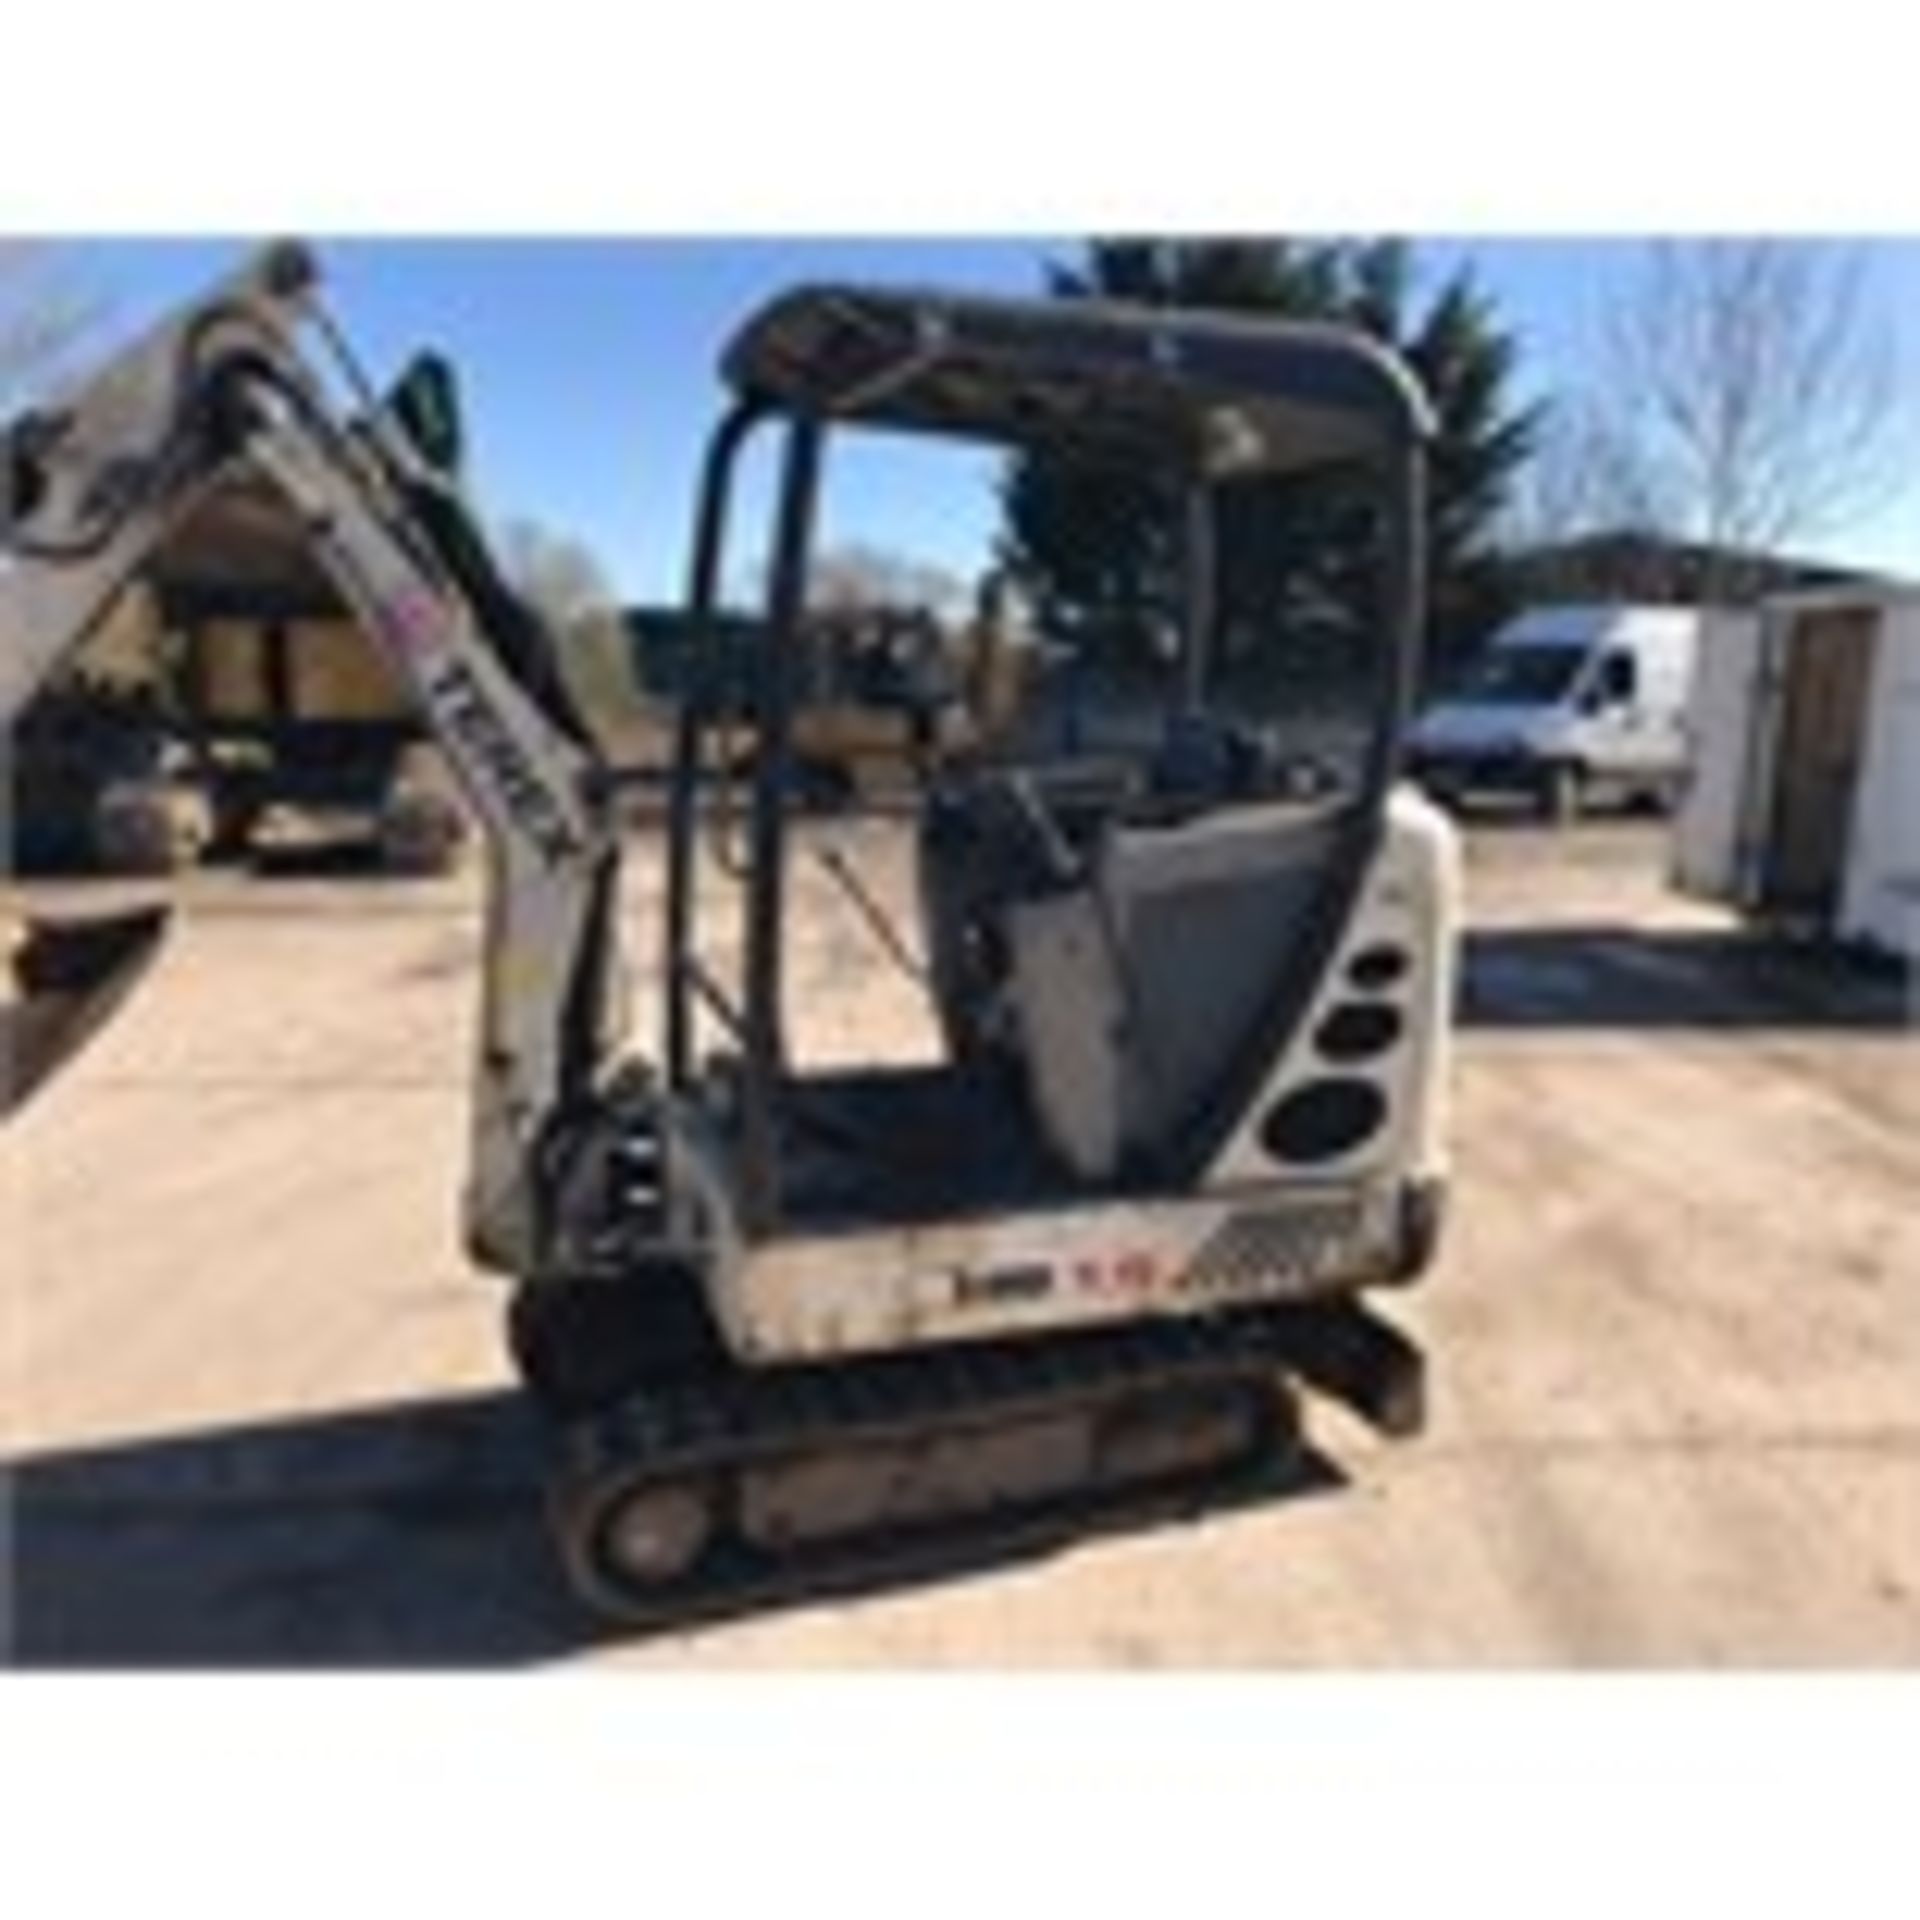 TEREX HR 1.5 MINI DIGGER WITH GRAB & HAMMER CONNECTIONS - 2005 (+VAT) - Image 8 of 14